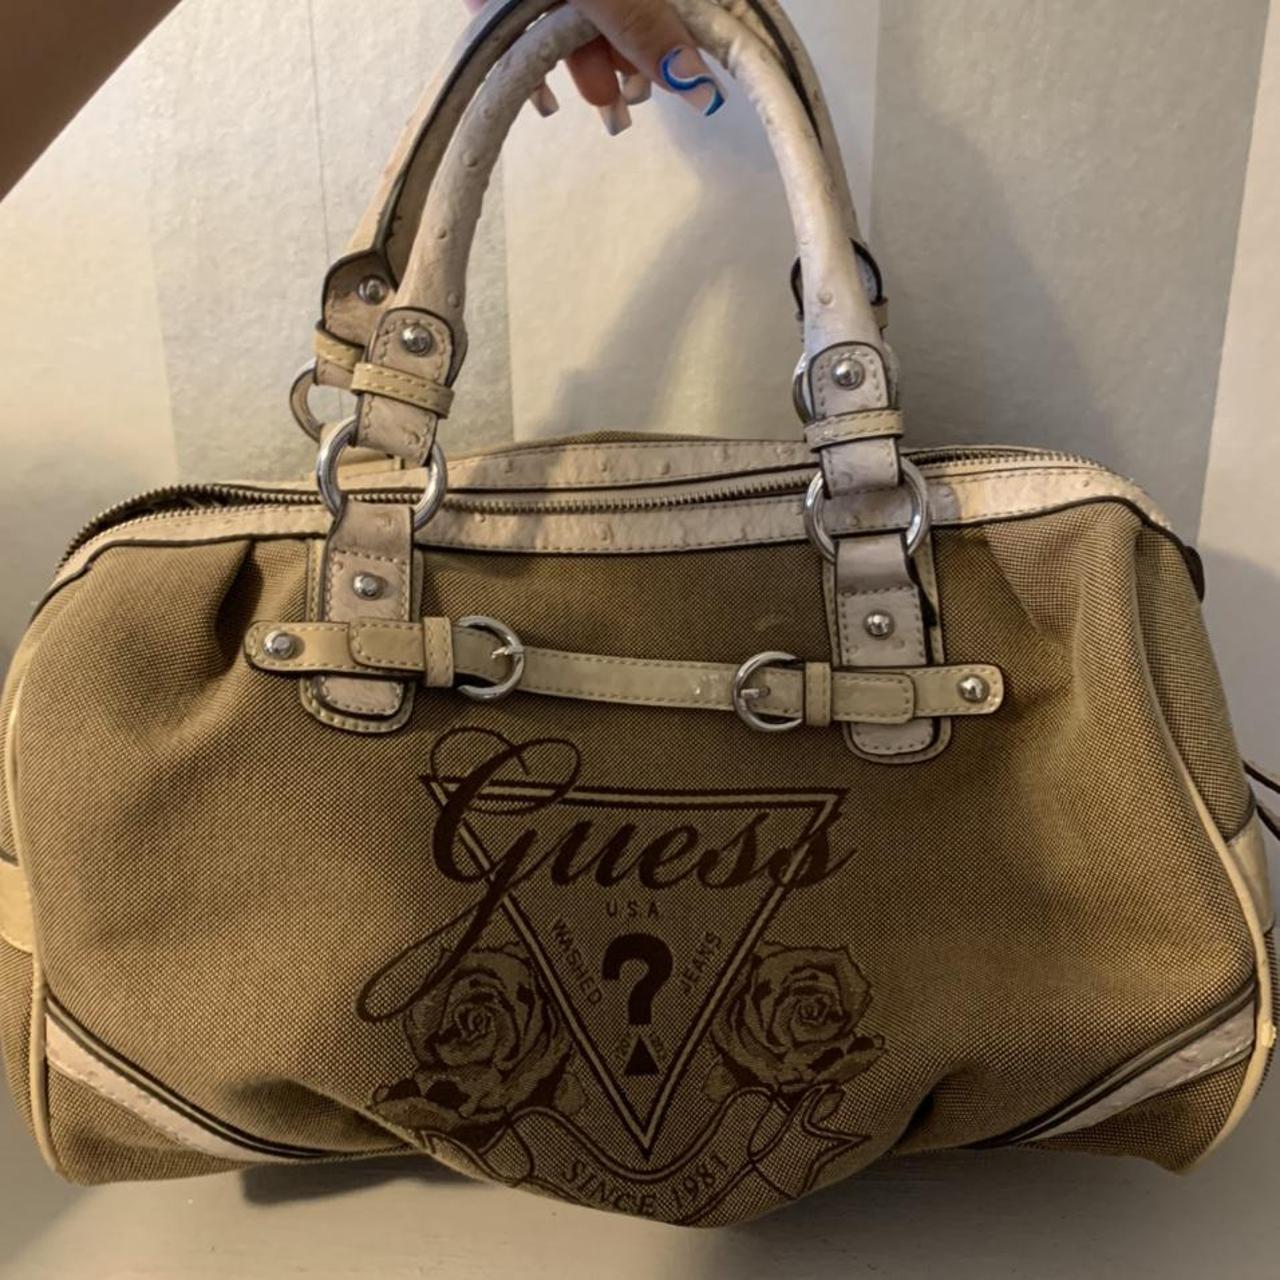 Product Image 1 - Guess vintage bag
Authentic comes with